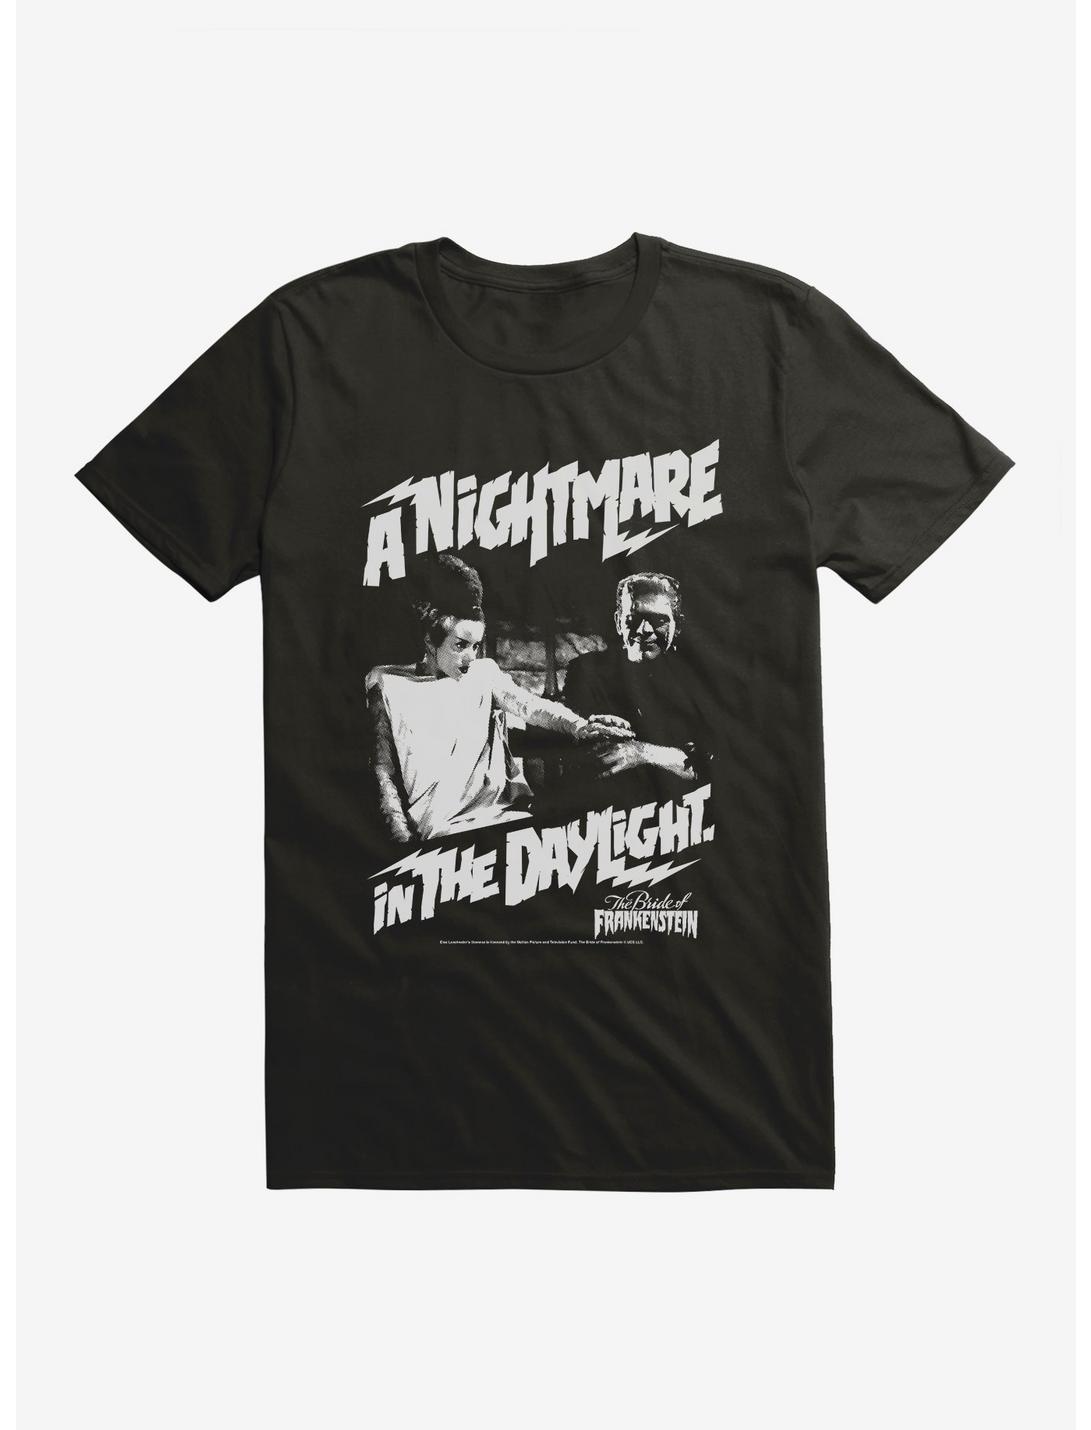 The Bride Of Frankenstein A Nightmare In The Daylight T-Shirt, BLACK, hi-res